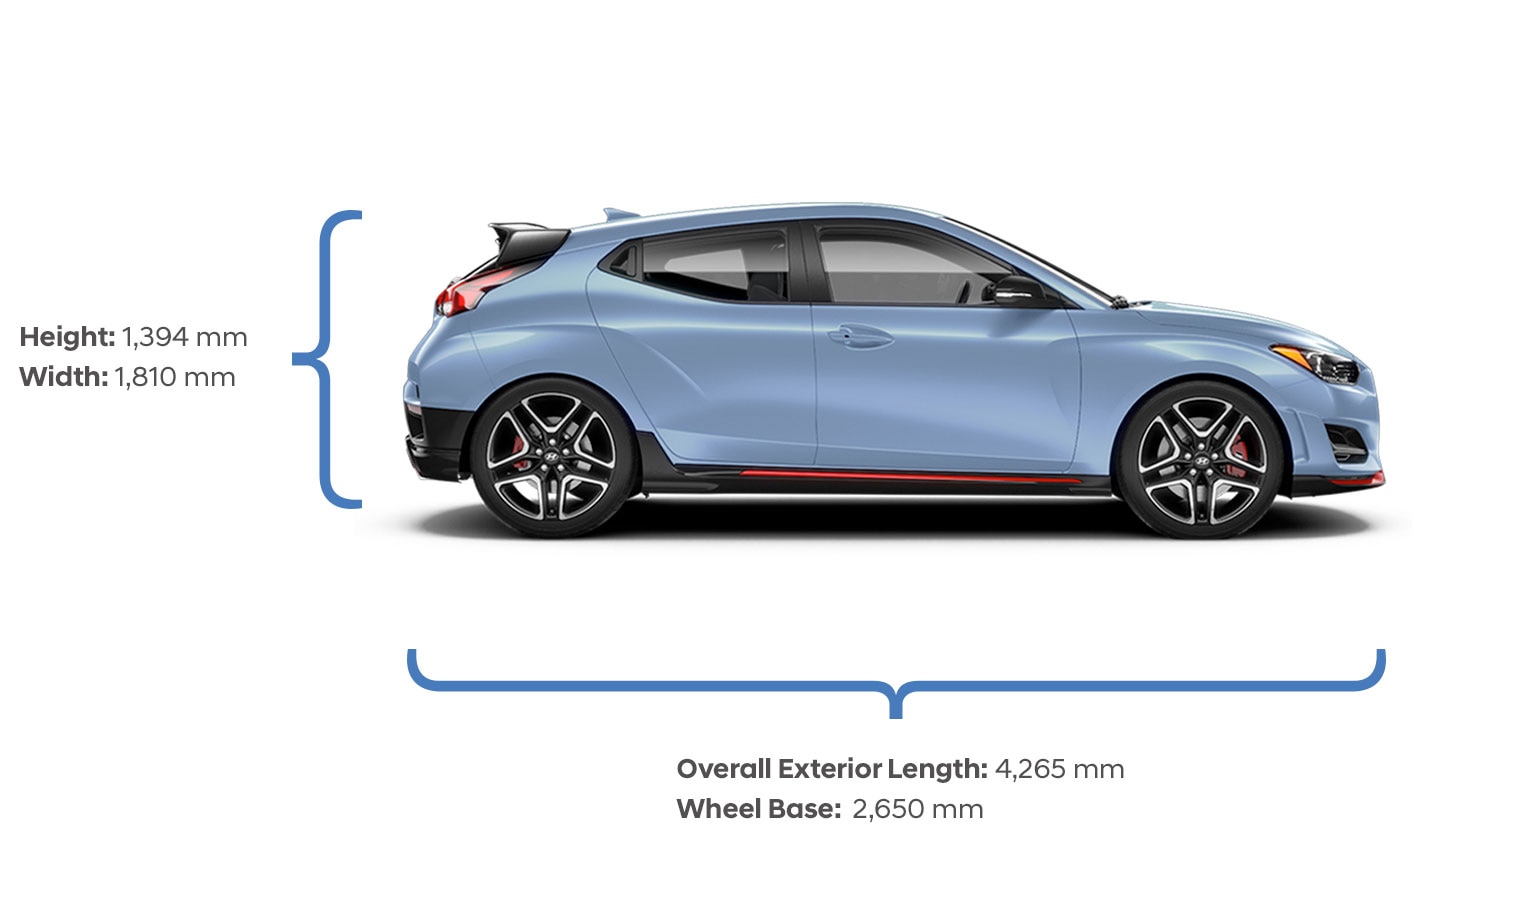 Height and width specifications of the 2020 Veloster N.